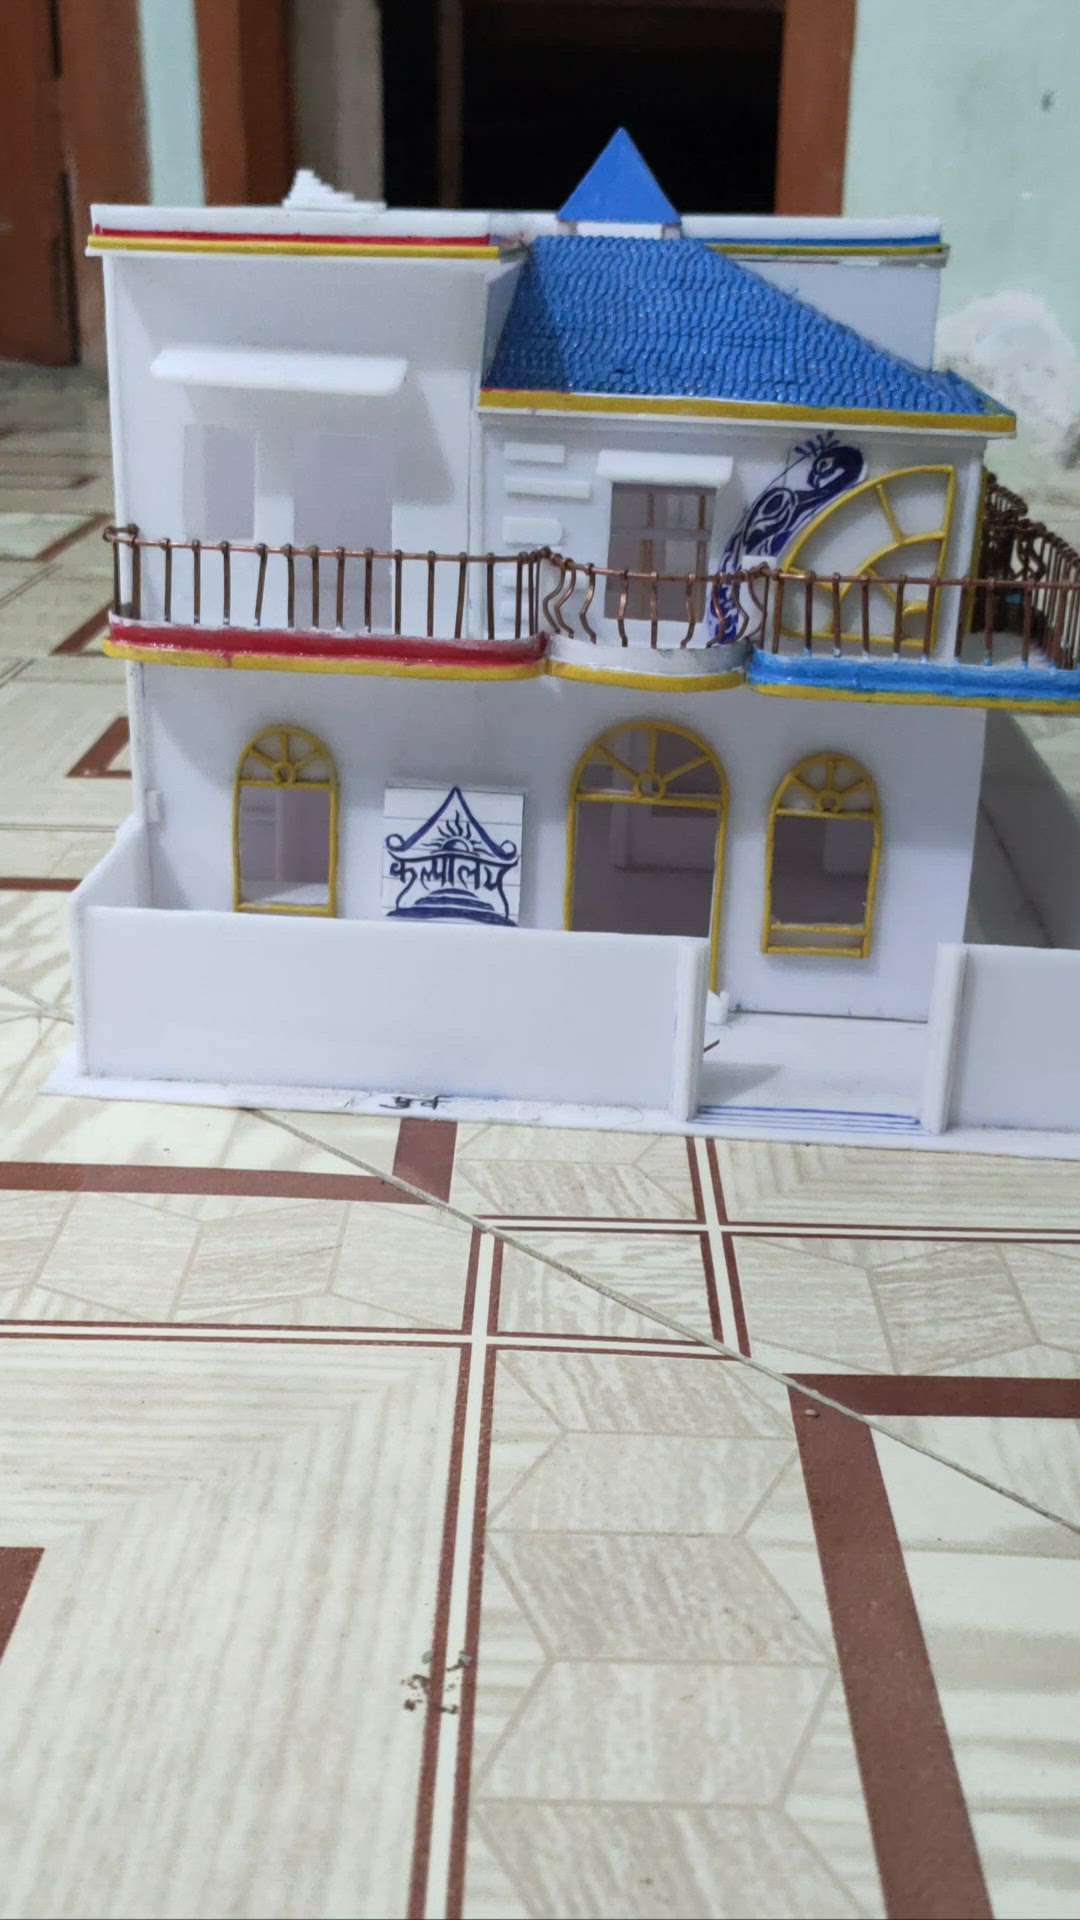 3D models of house, shopping mall, hotel, school are made in our place according to complete Vastu Shastra at cheap prices, please contact us if needed.